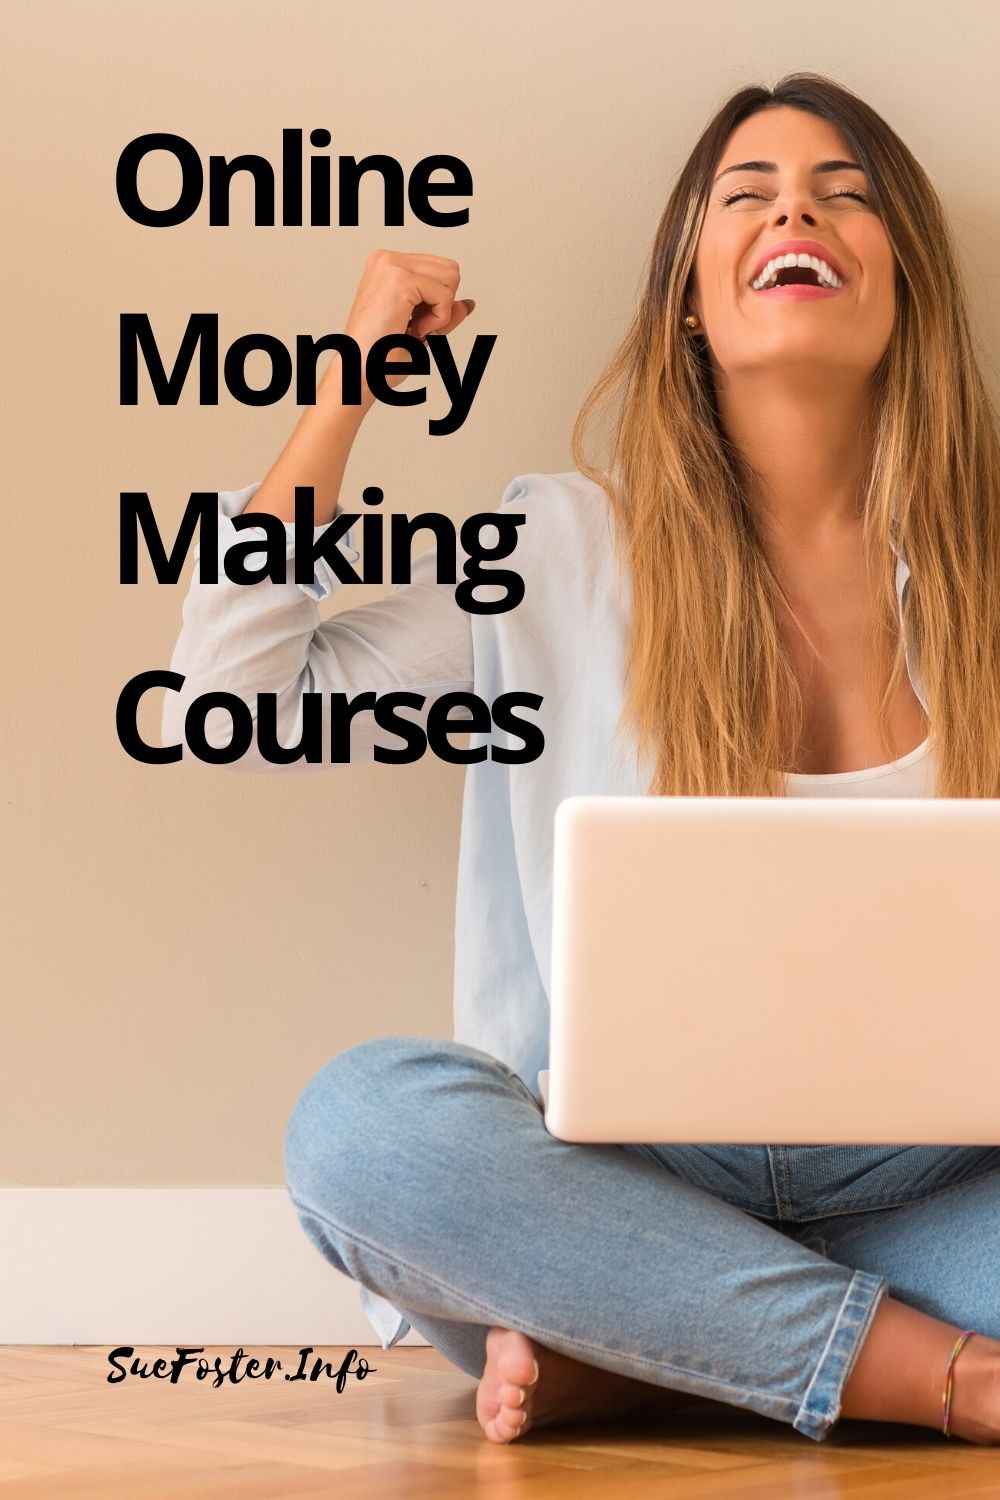 If you're looking for an online money making course, these courses will be of interest to you and can help increase your knowledge and online income if you put in the work.